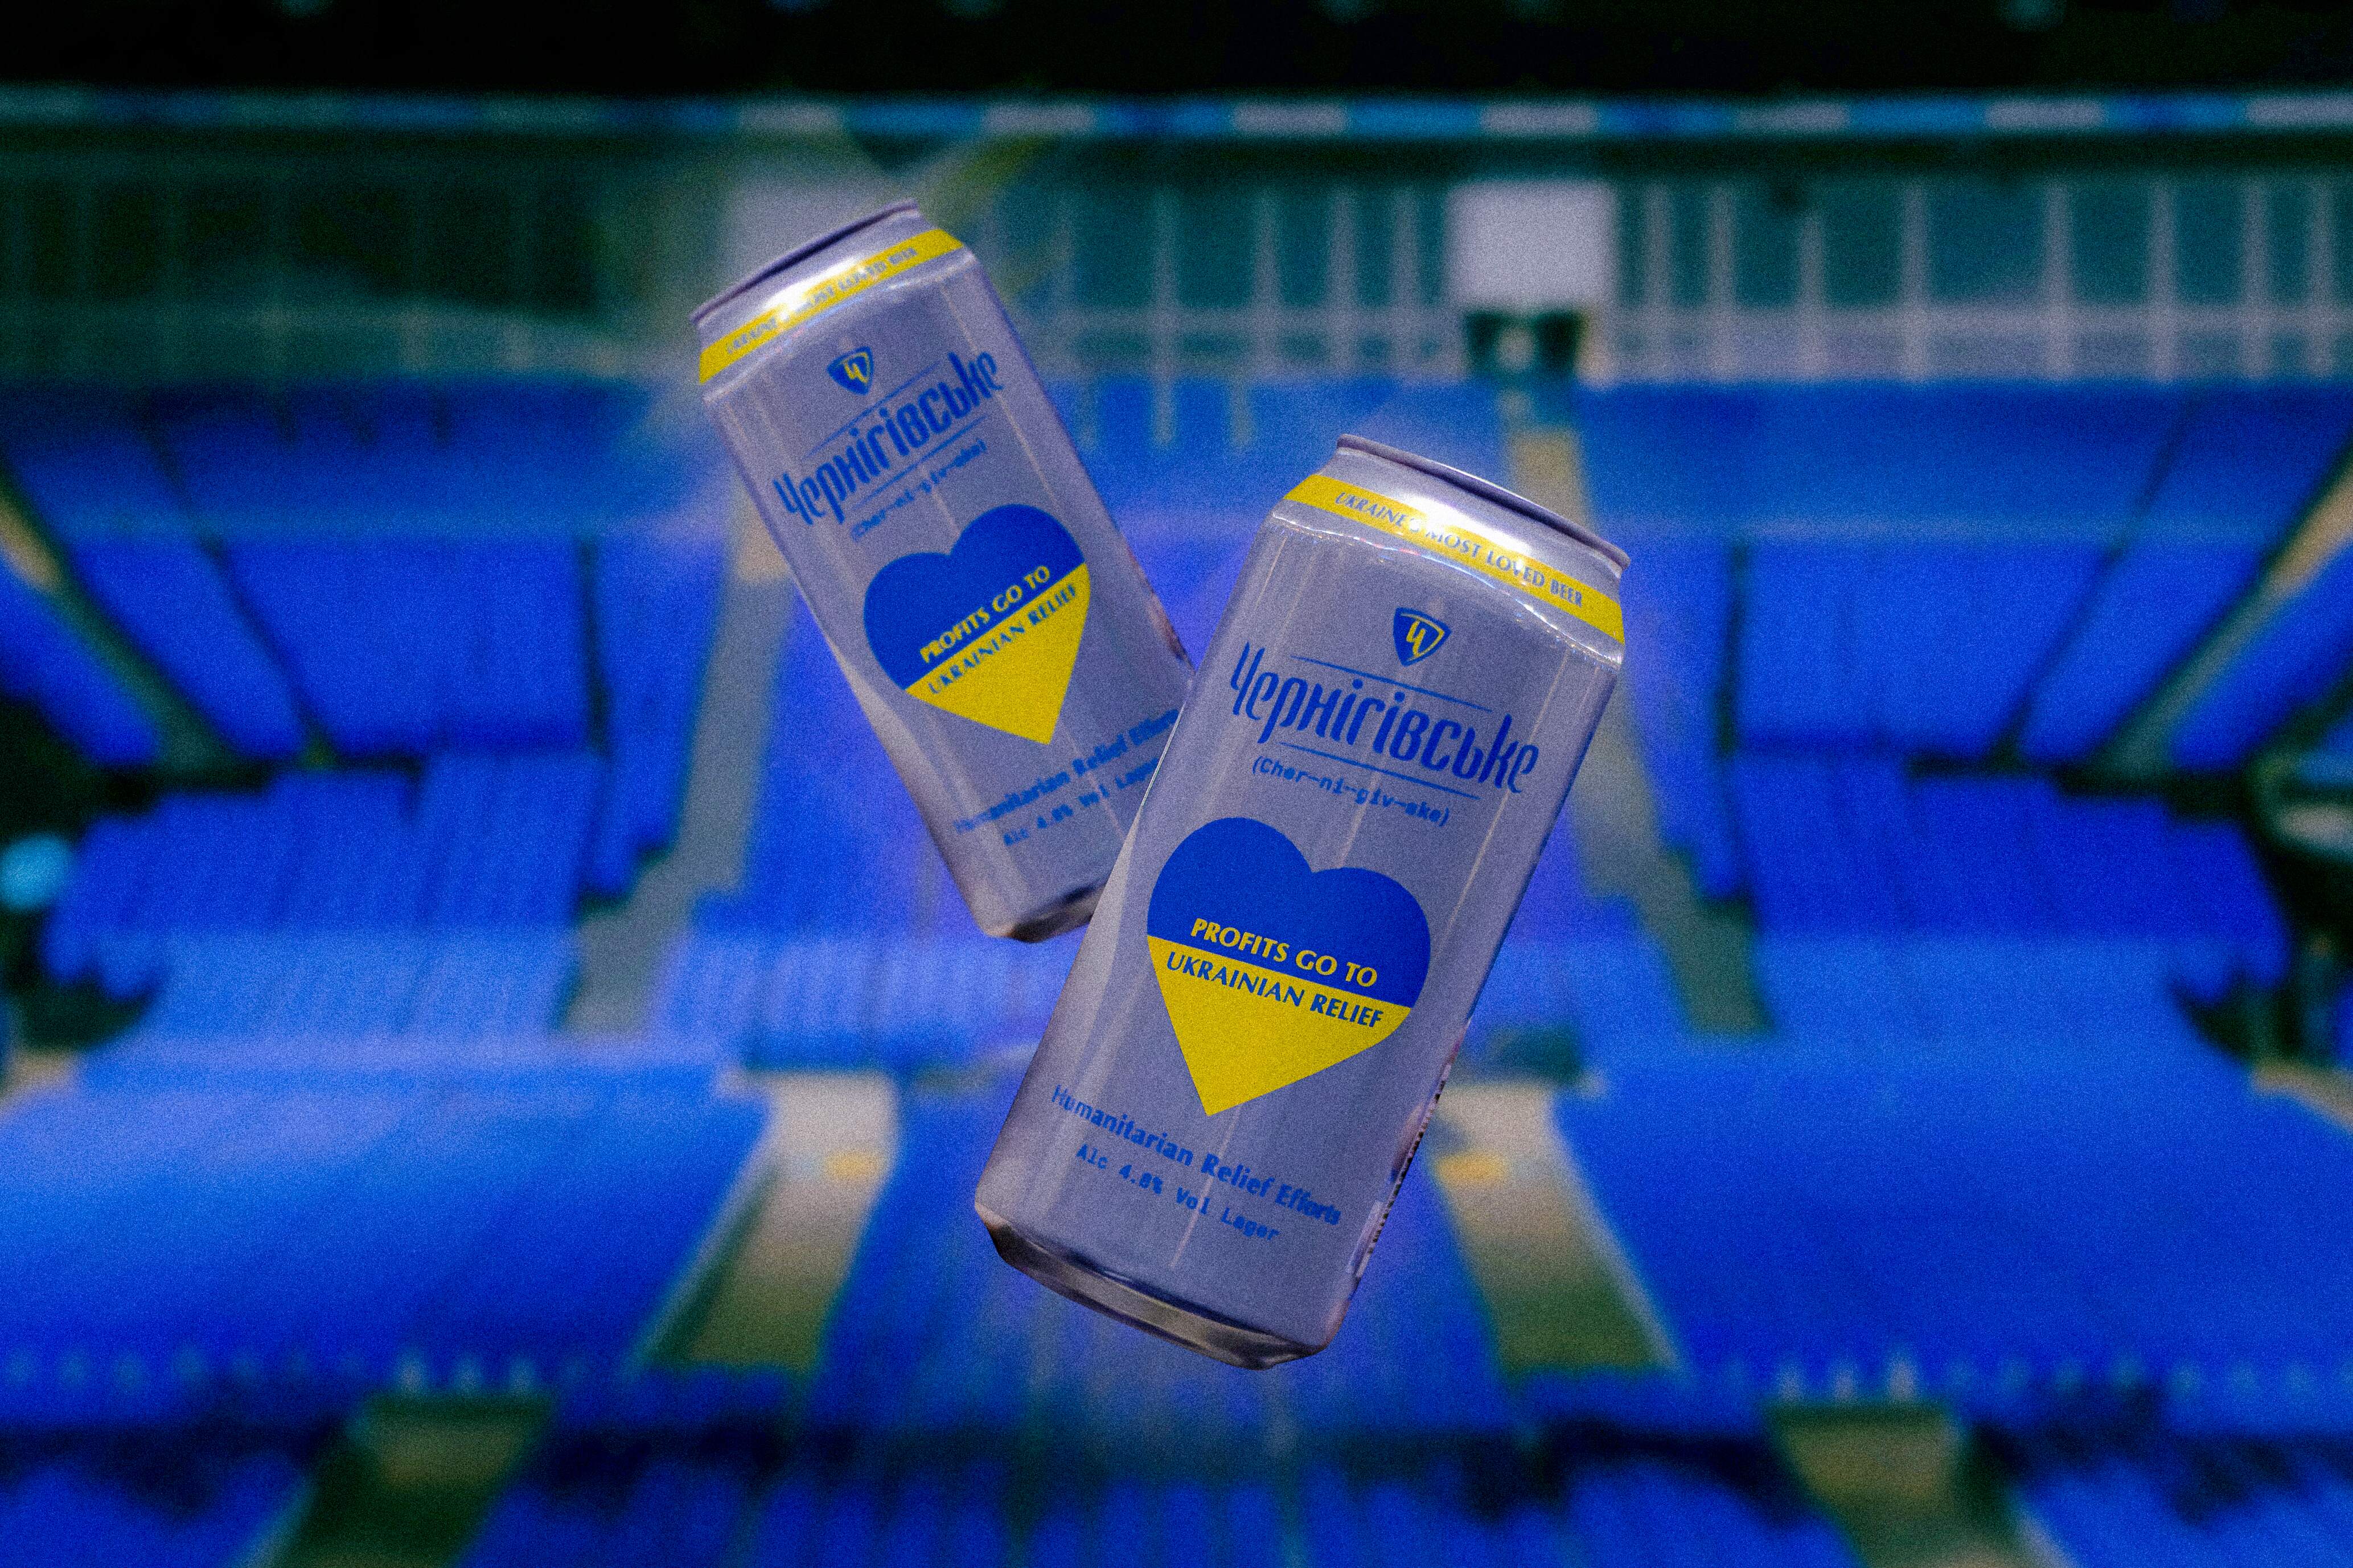 Budweiser Brewing Group brings Ukrainian beer to The O2 in UK-first, with profits supporting humanitarian relief efforts